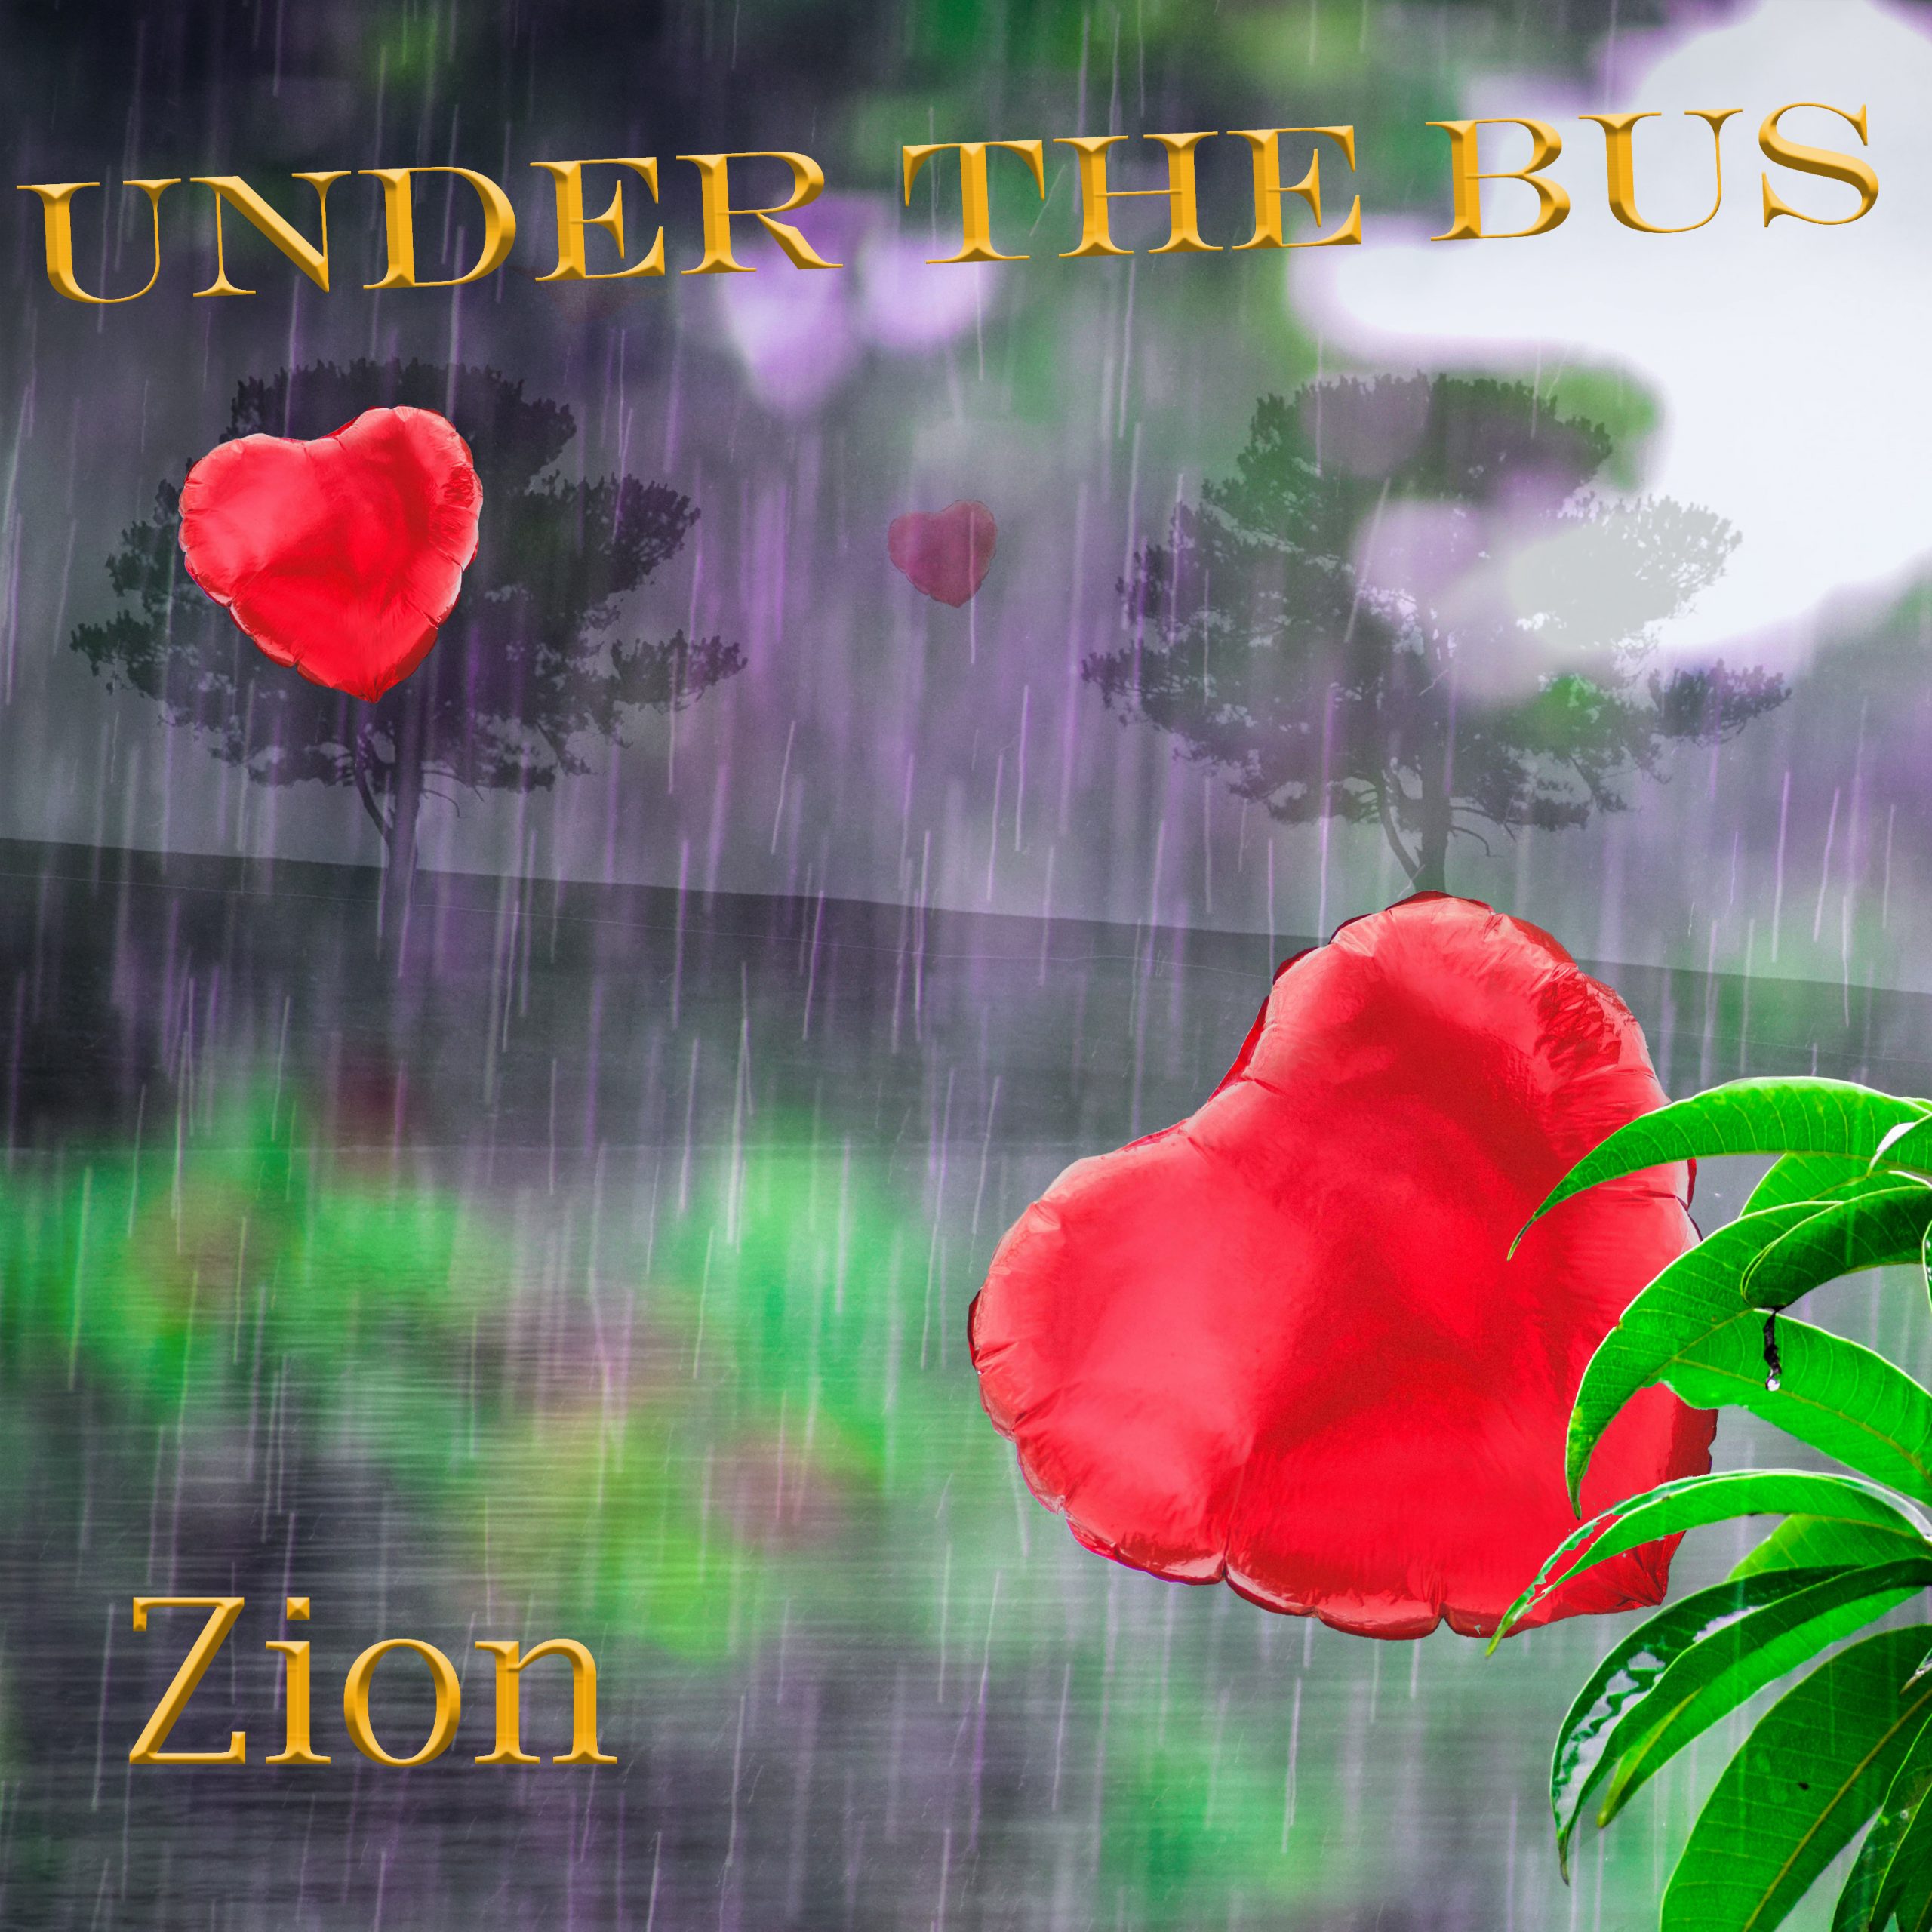 Zion Album Cover Under The Bus 2021 Rainy Day Lost Balloons